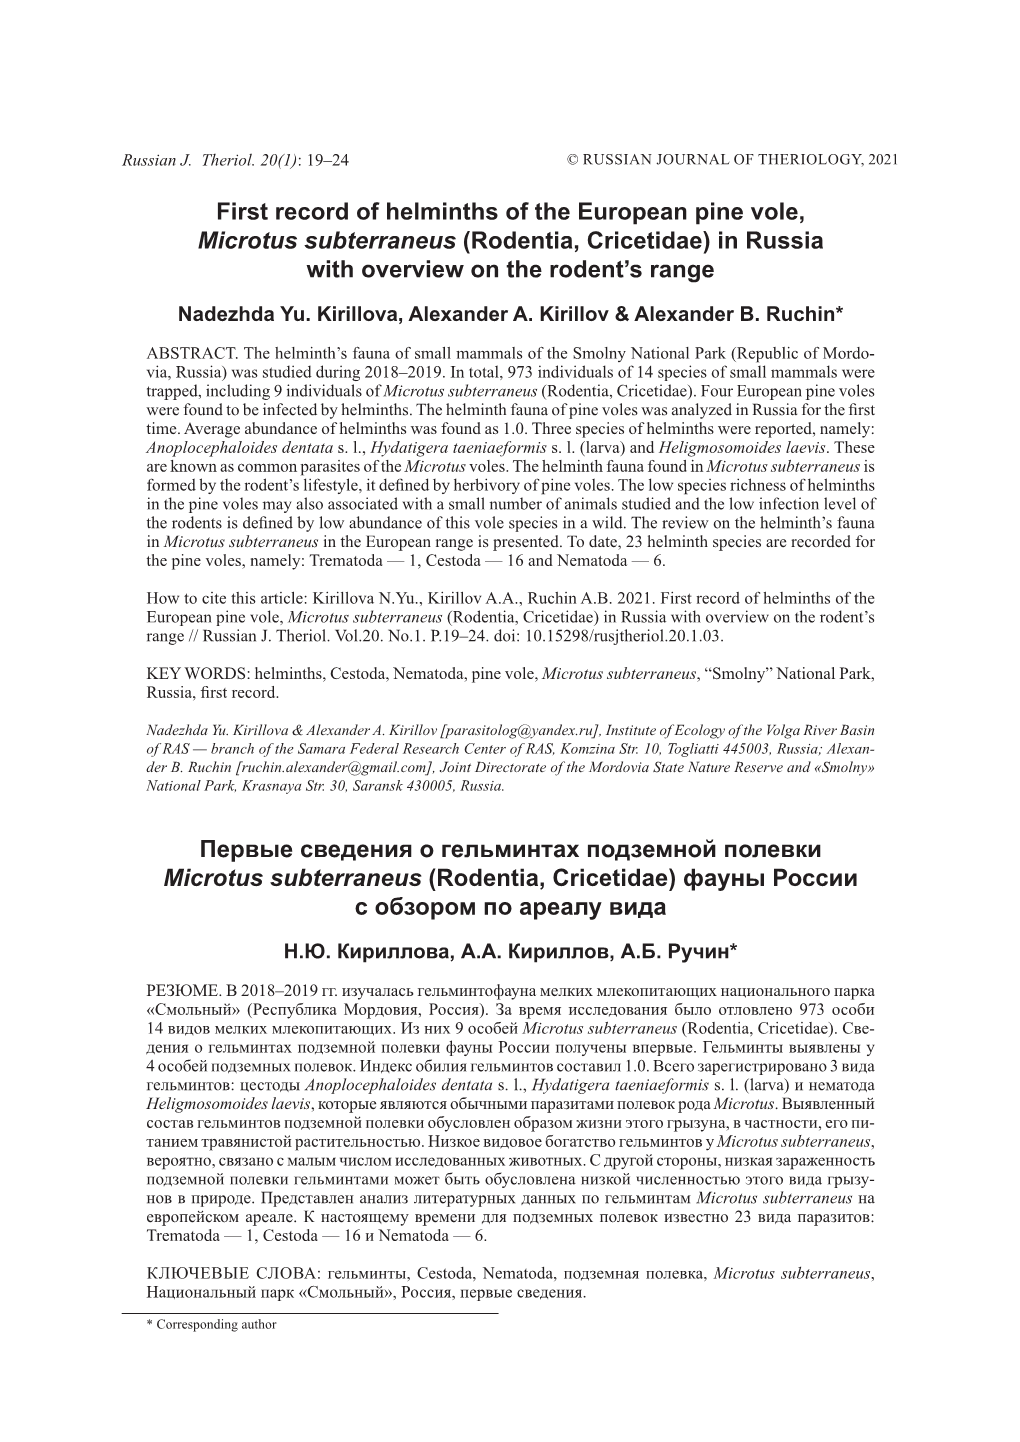 First Record of Helminths of the European Pine Vole, Microtus Subterraneus (Rodentia, Cricetidae) in Russia with Overview on the Rodent’S Range